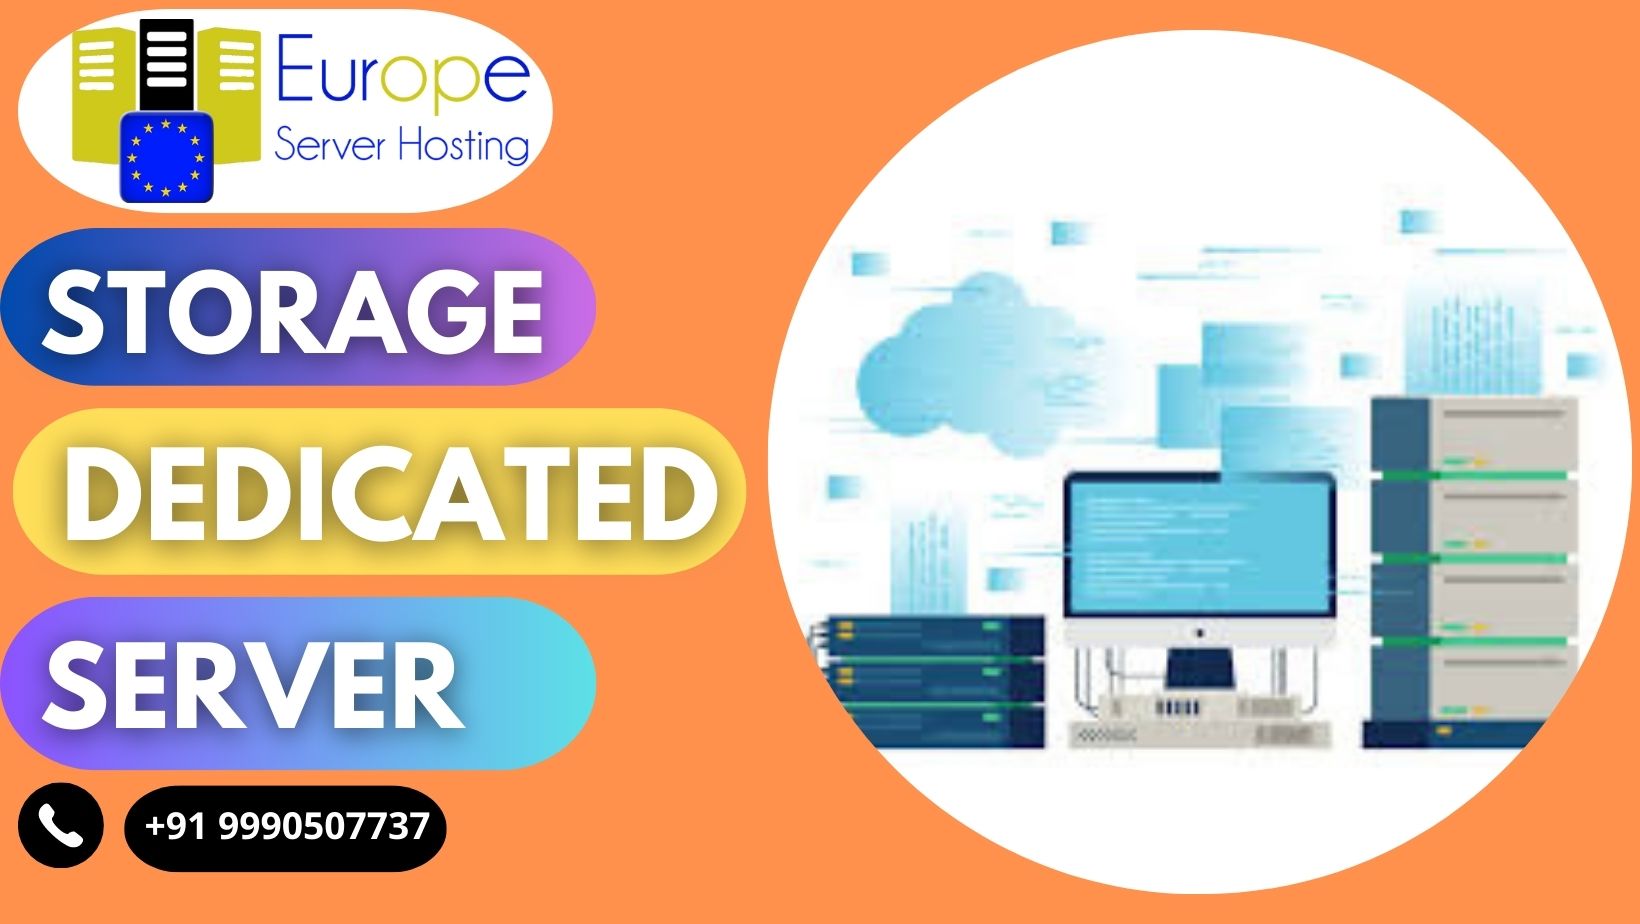 The beauty of a storage dedicated server lies in its scalability. Providers provide bendy plans which accommodate increasing storage requirements, making sure your information infrastructure grows seamlessly together with your commercial enterprise.